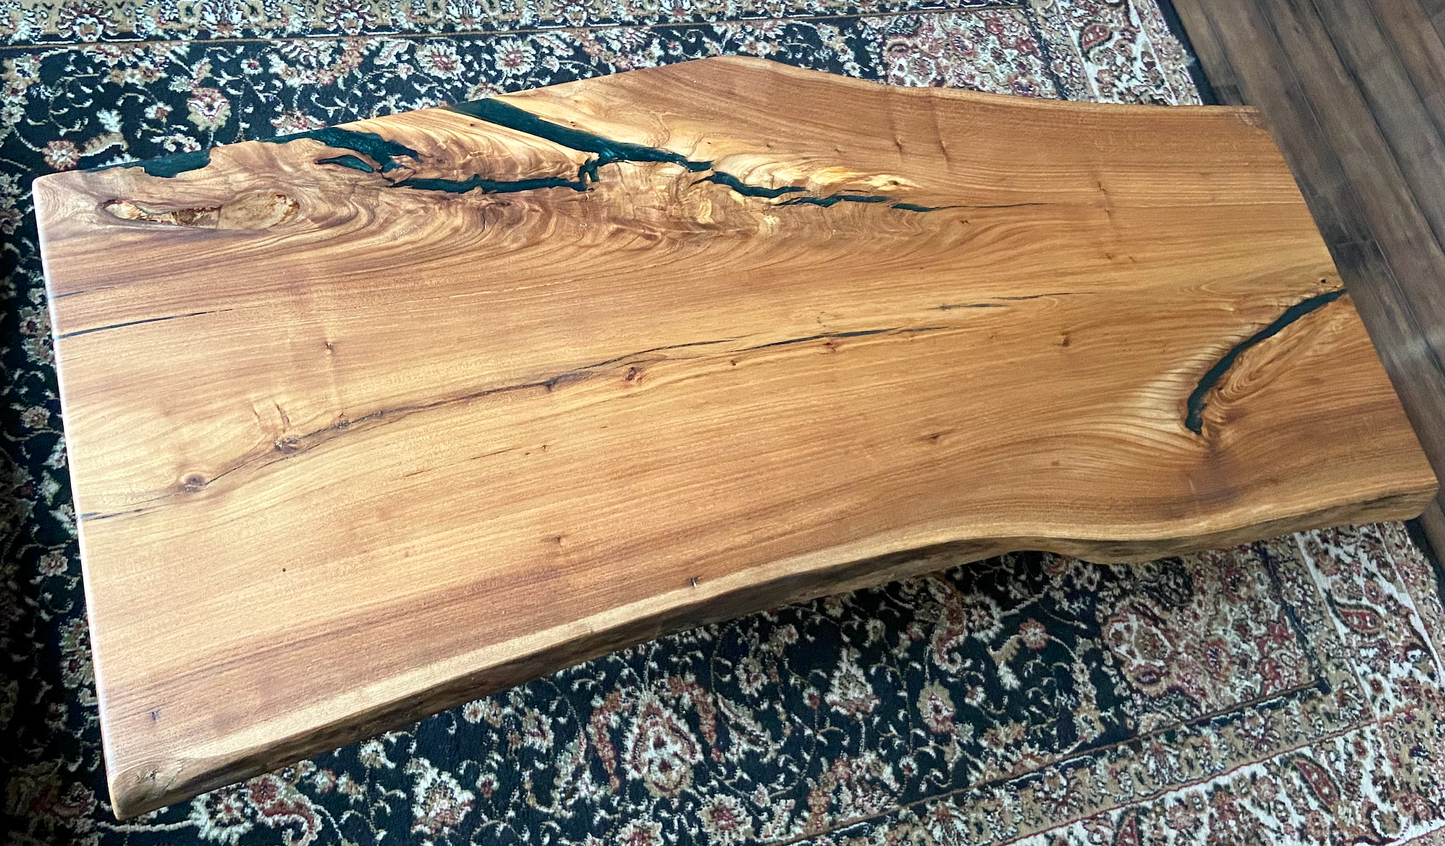 Natural Live Edge Chestnut Wood and Epoxy Coffee Table|Live Edge Wood Table|Rustic Wood Table|Live Edge Coffee Table|Wood Display Table